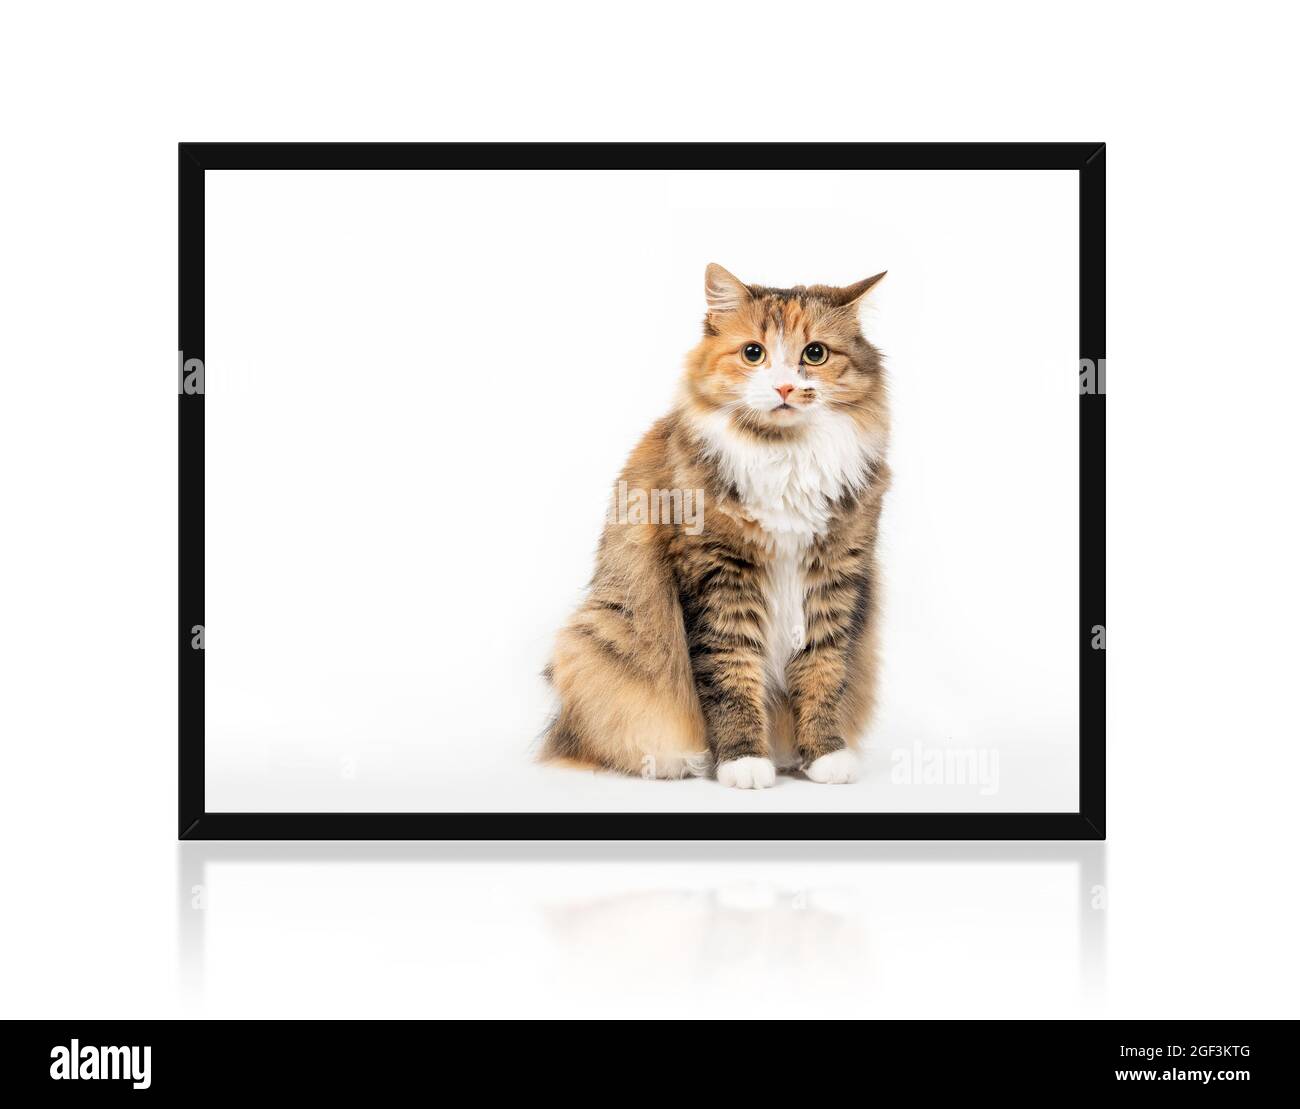 Cat sitting upright inside a picture frame with questioning or annoyed expression while looking at the camera. Cute fluffy orange white female kitty w Stock Photo